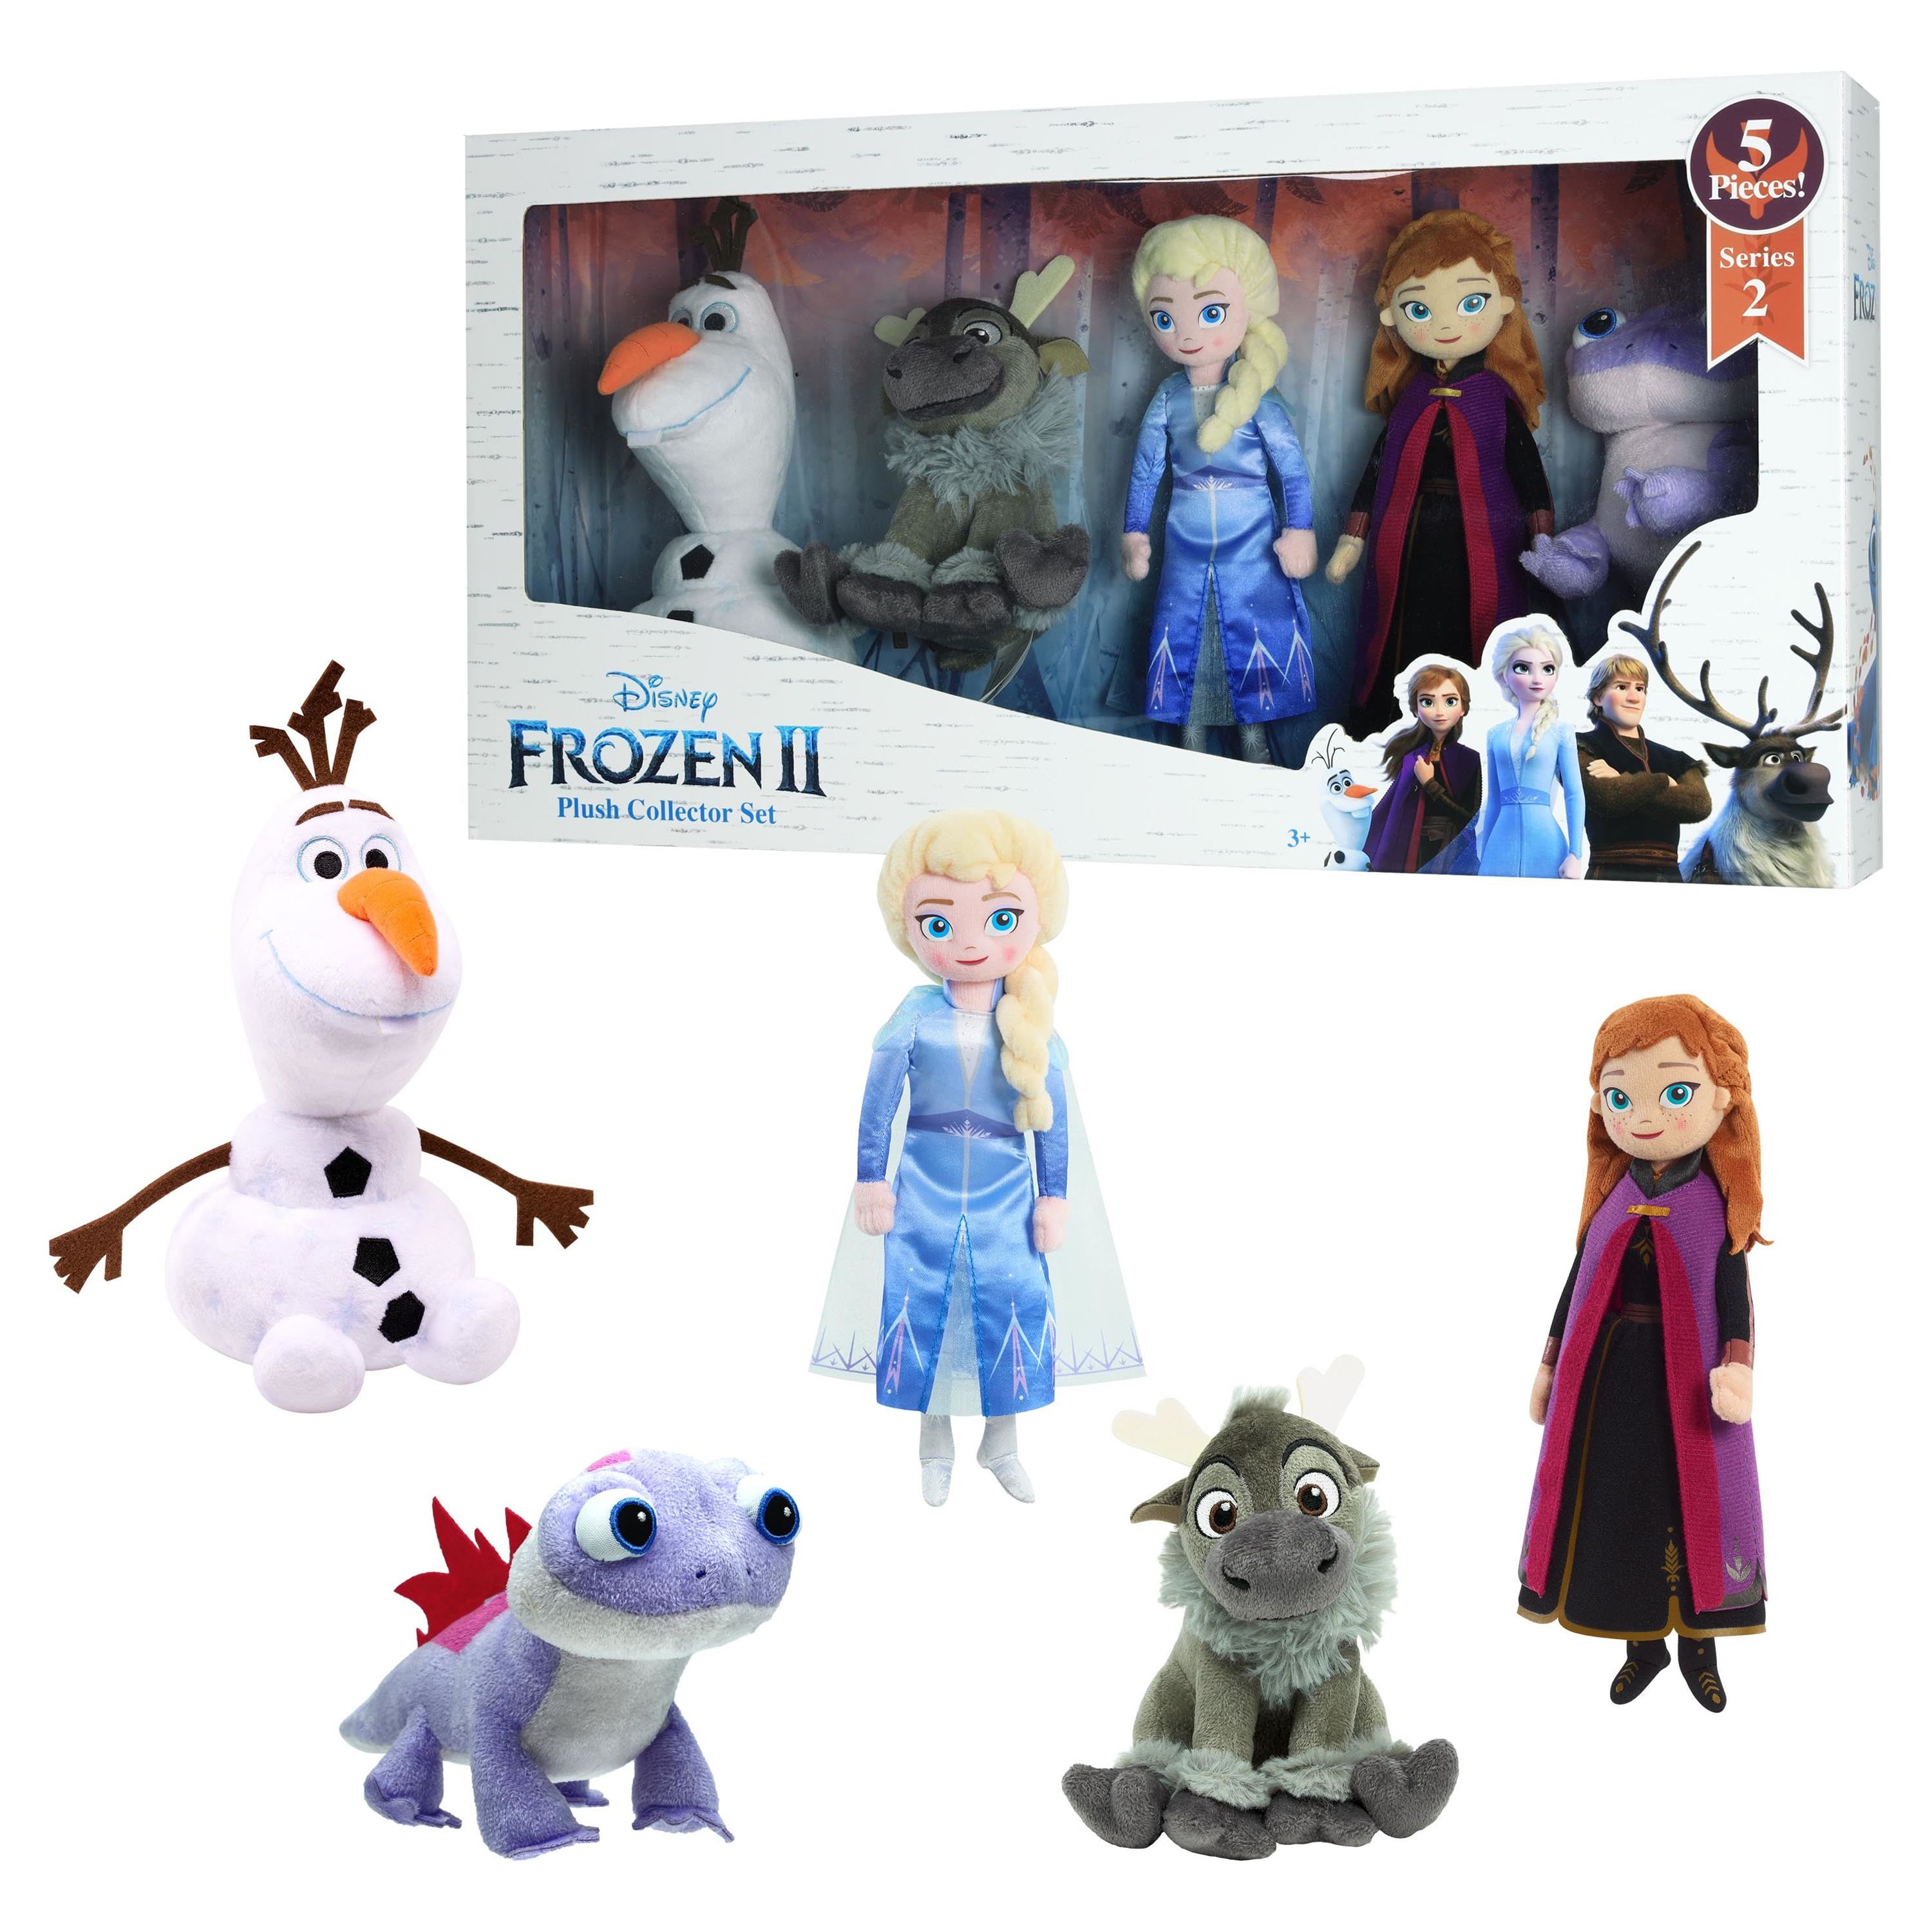 Disney’s Frozen 2 Plush Collector Set, 5-pieces, Officially Licensed Kids Toys for Ages 3 Up, Gifts and Presents - image 1 of 3